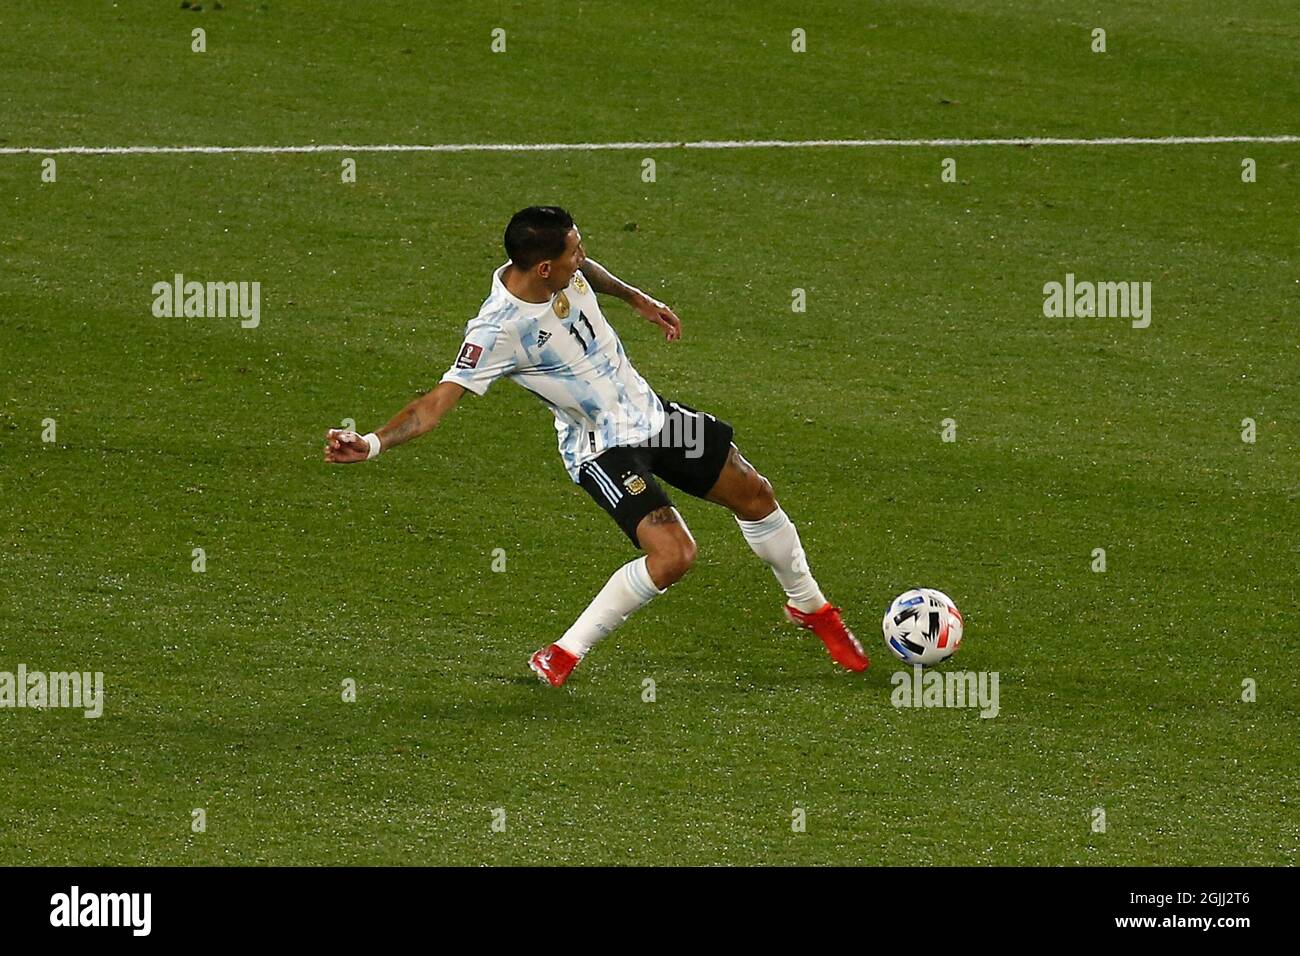 Buenos Aires, Argentina. 09th Sep, 2021. BUENOS AIRES - SEPTEMBER 9: Forward Angel Di María (11) of Argentina controls the ball during a match between Argentina and Bolivia as part of South American Qualifiers for Qatar 2022 at Estadio Monumental Antonio Vespucio Liberti on September 9, 2021 in Buenos Aires, Argentina. (Photo by Florencia Tan Jun/PxImages) Credit: Px Images/Alamy Live News Stock Photo